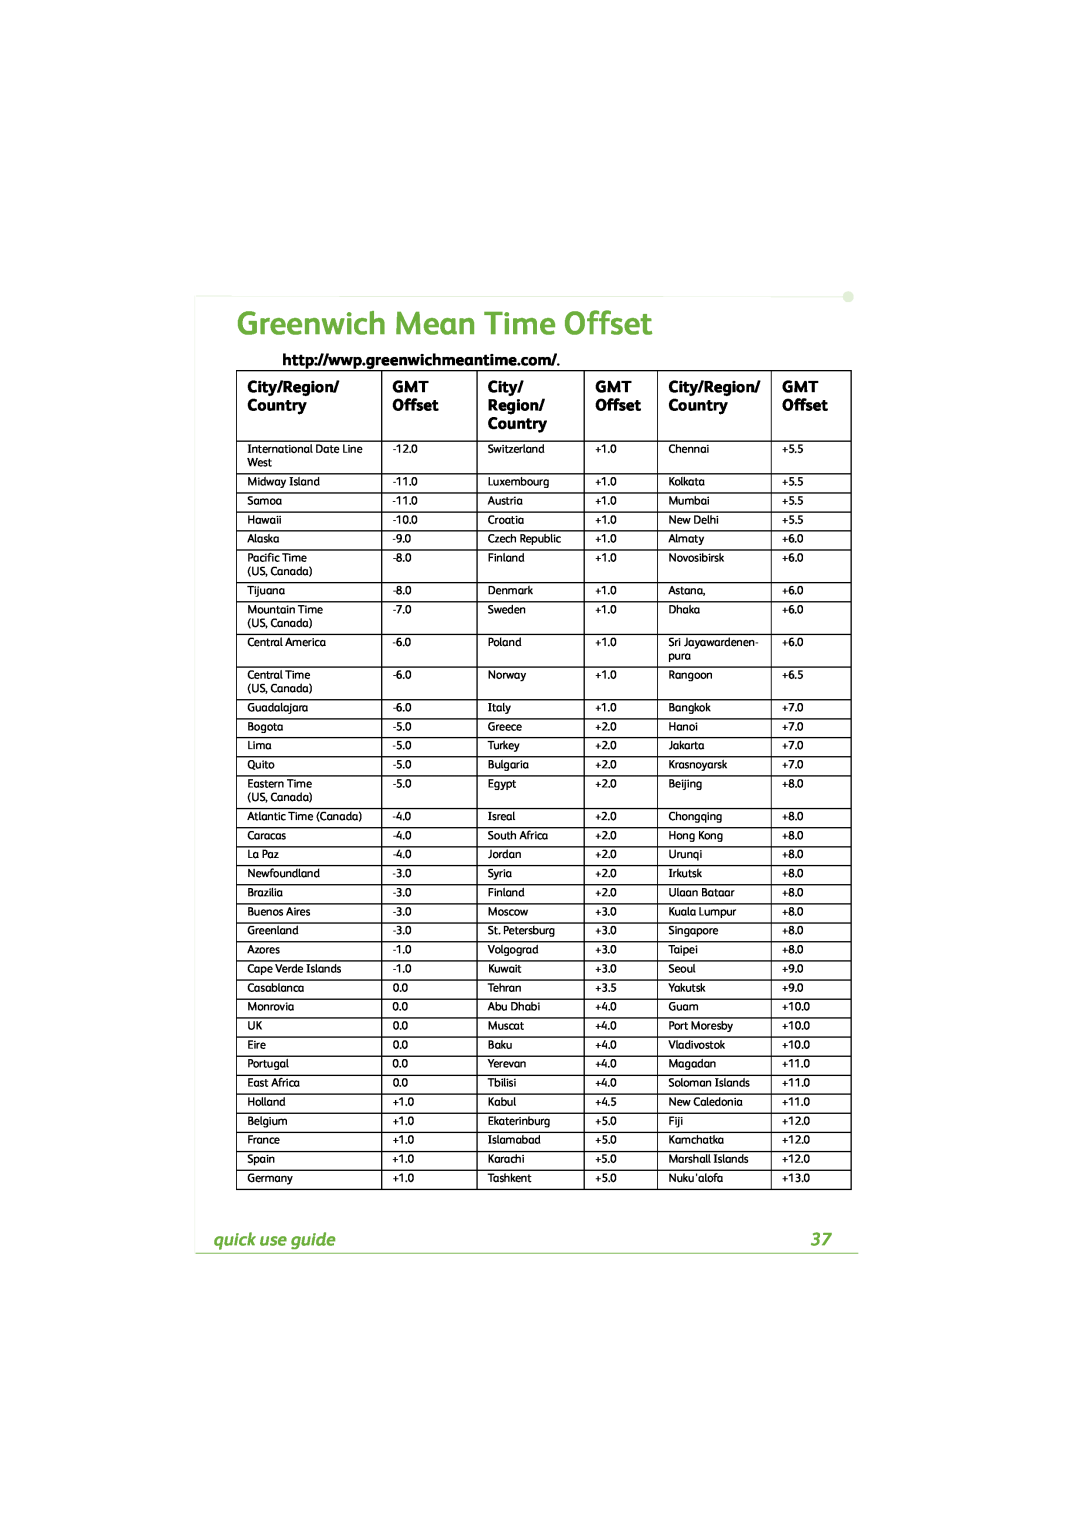 Xerox 4260C manual Greenwich Mean Time Offset, quick use guide 